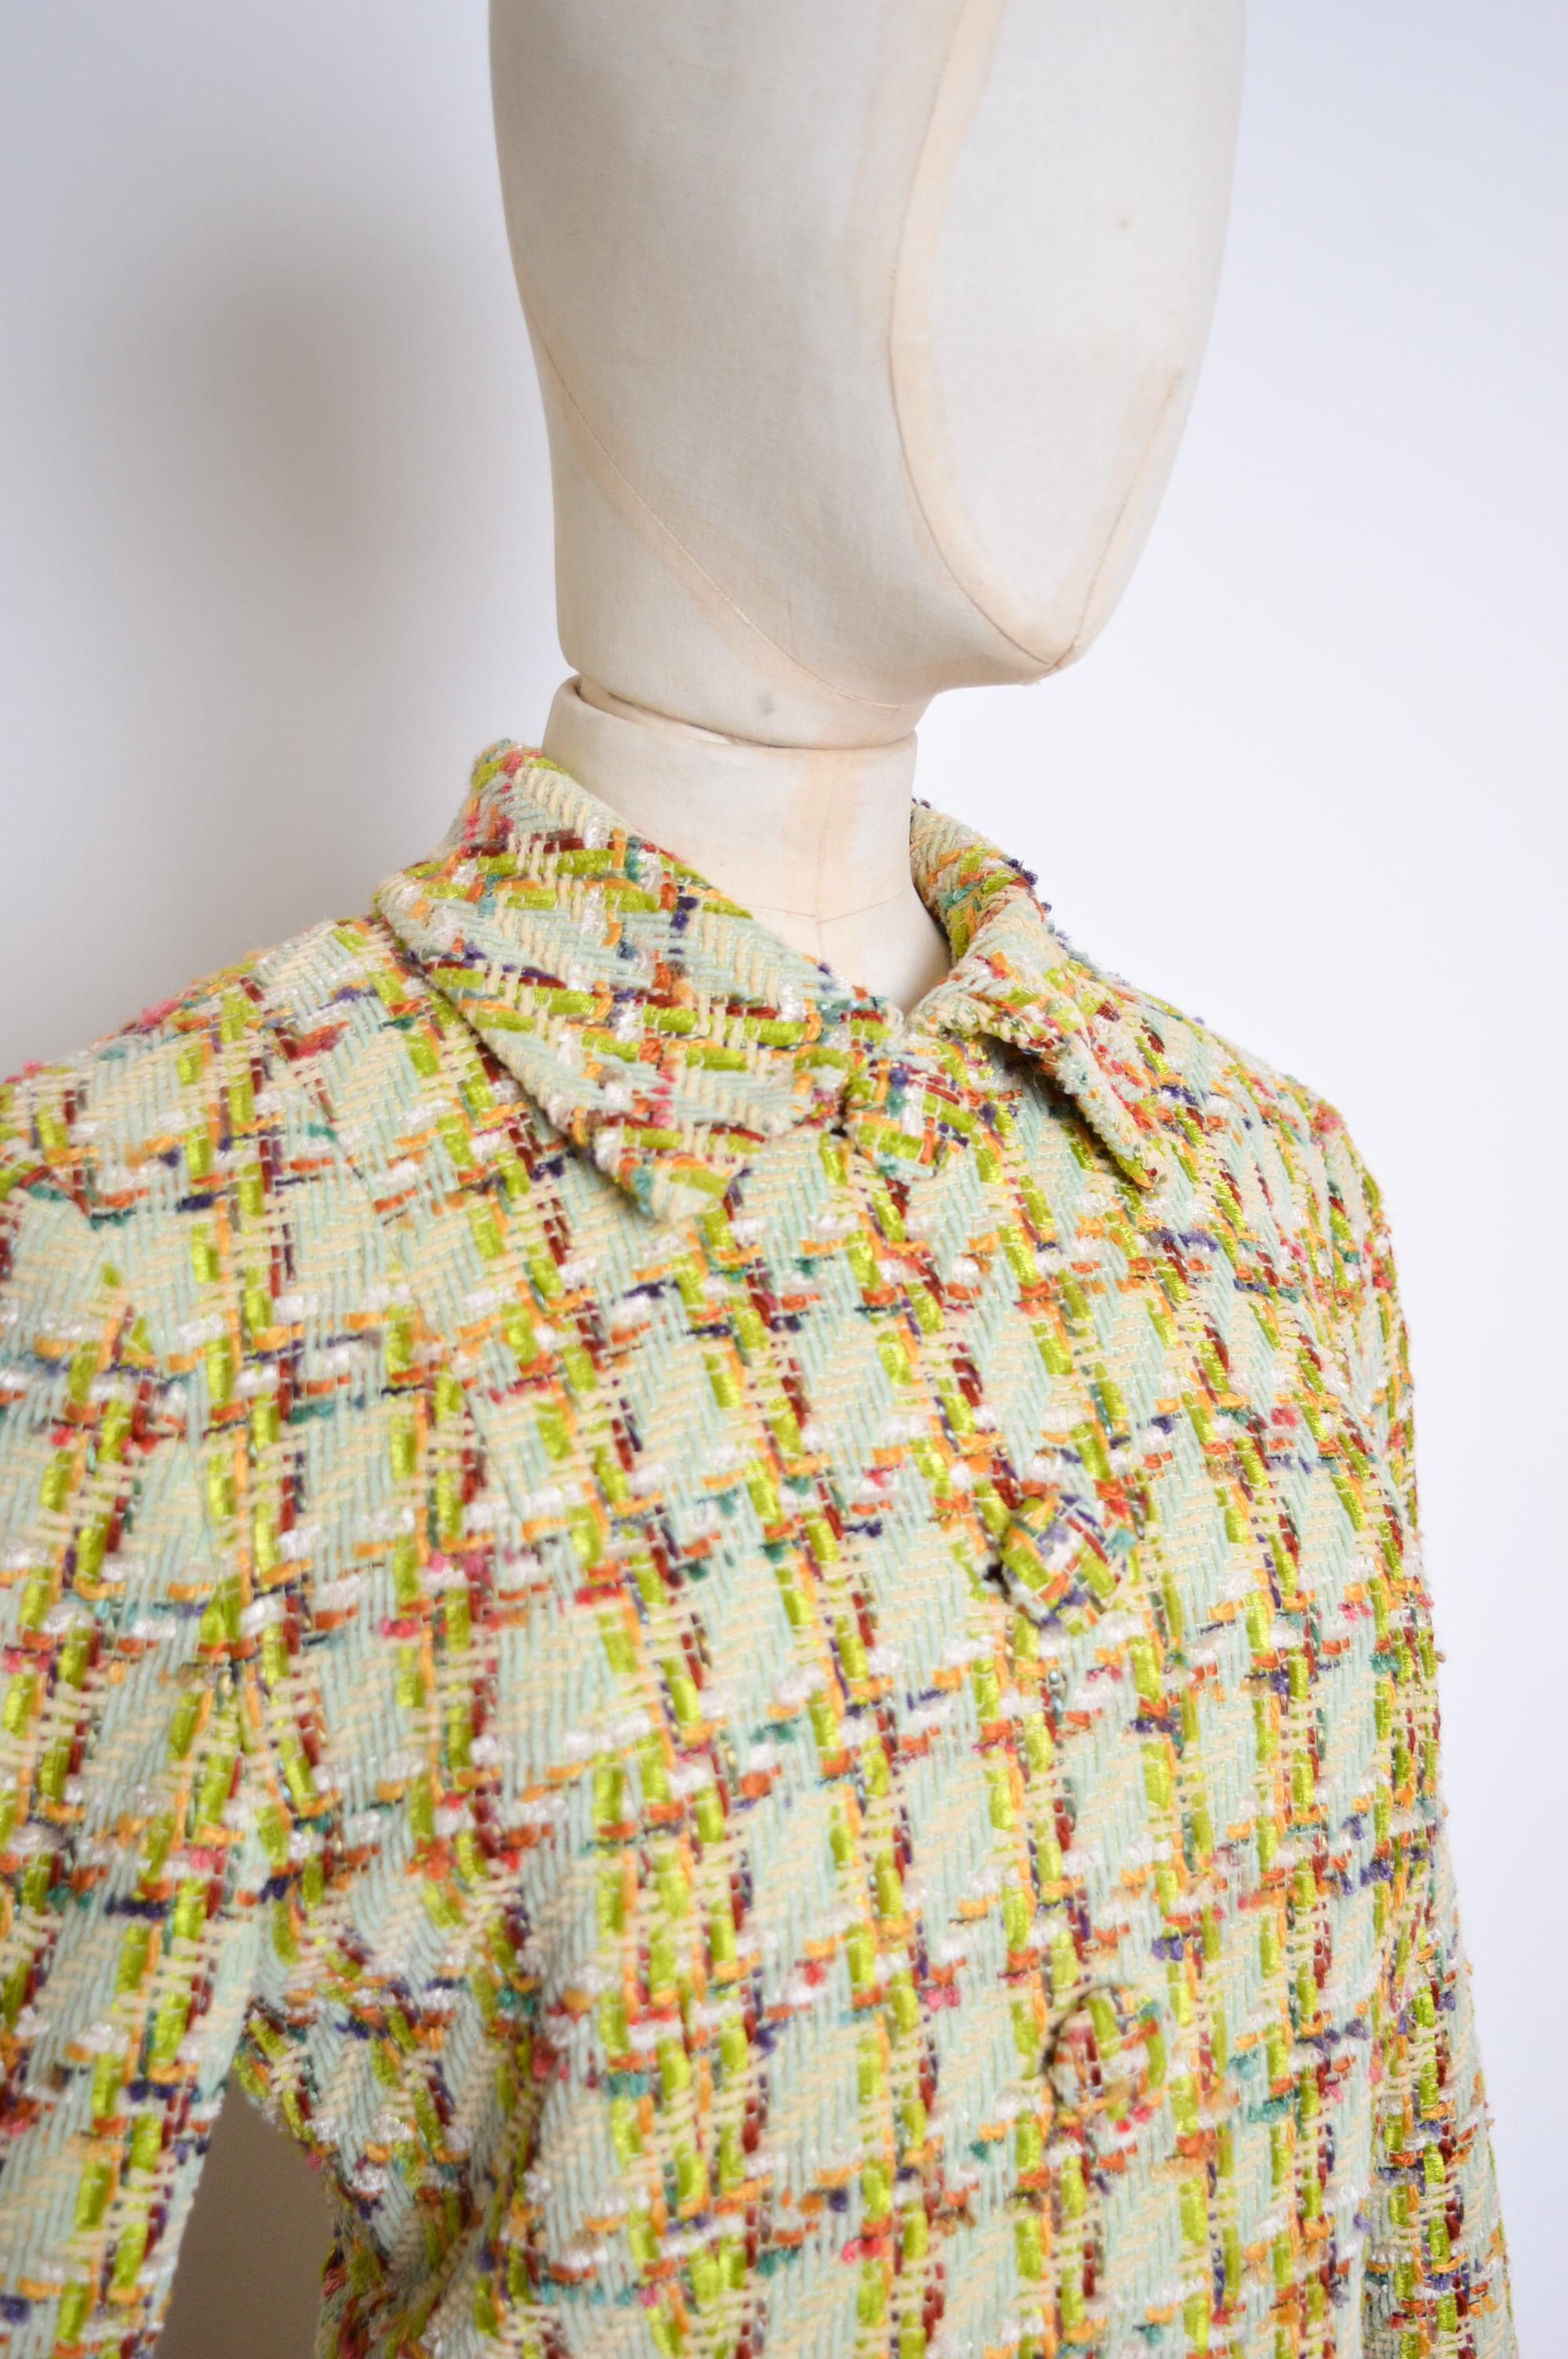 S/S 1993 ROCHAS Jewel Tone Lime Green Tweed Boucle Jacket & Skirt Matching Set For Sale 8